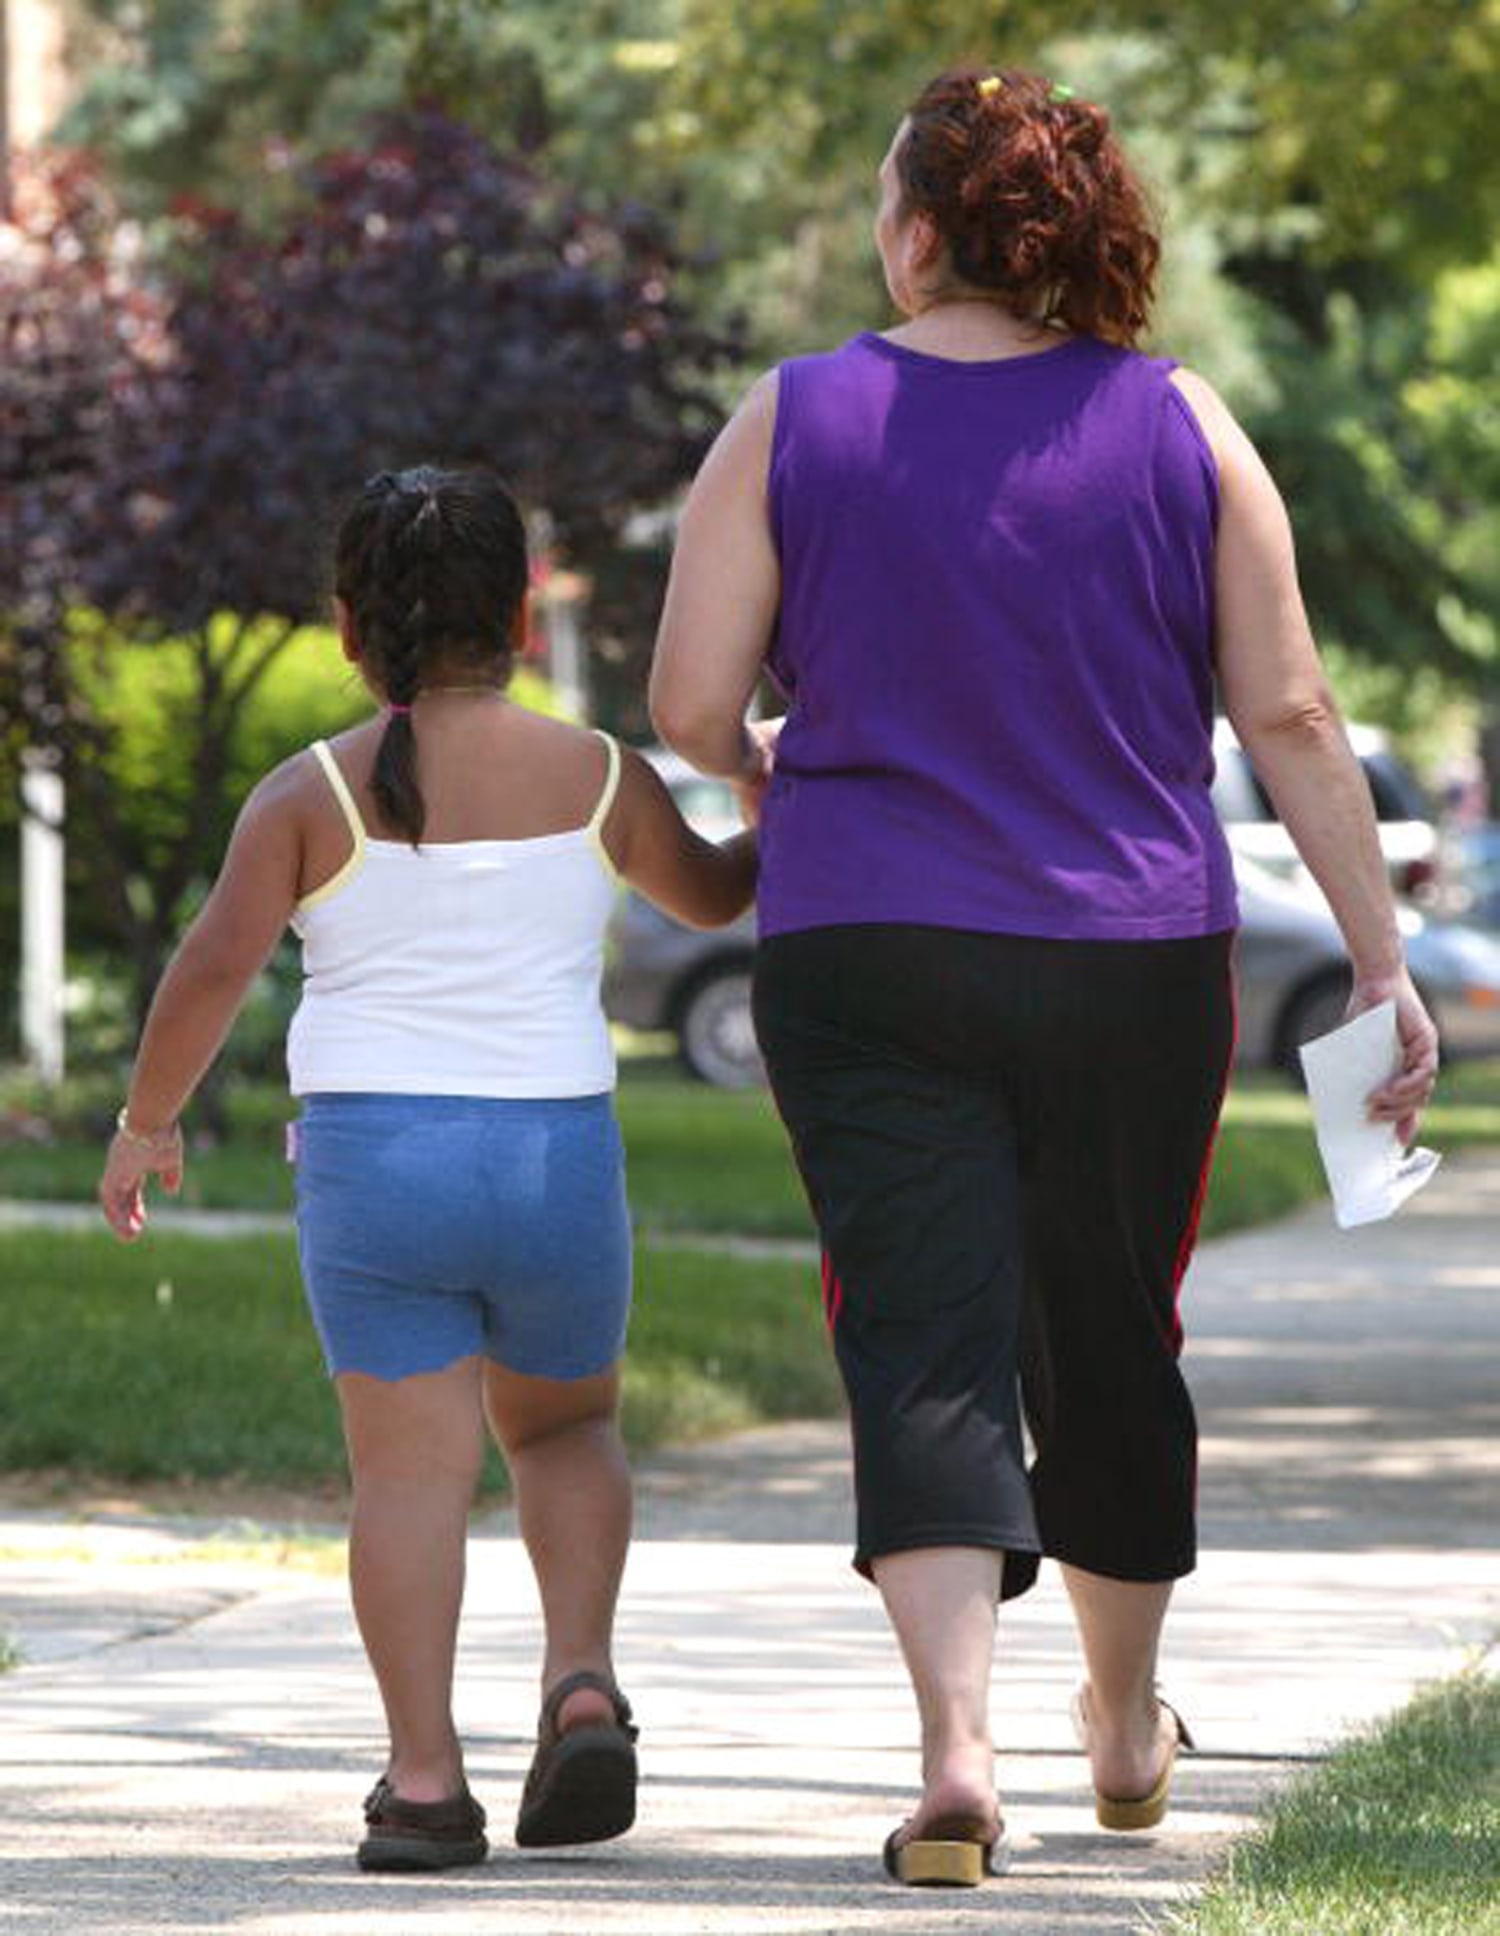 Obesity linked to early puberty in girls, study finds